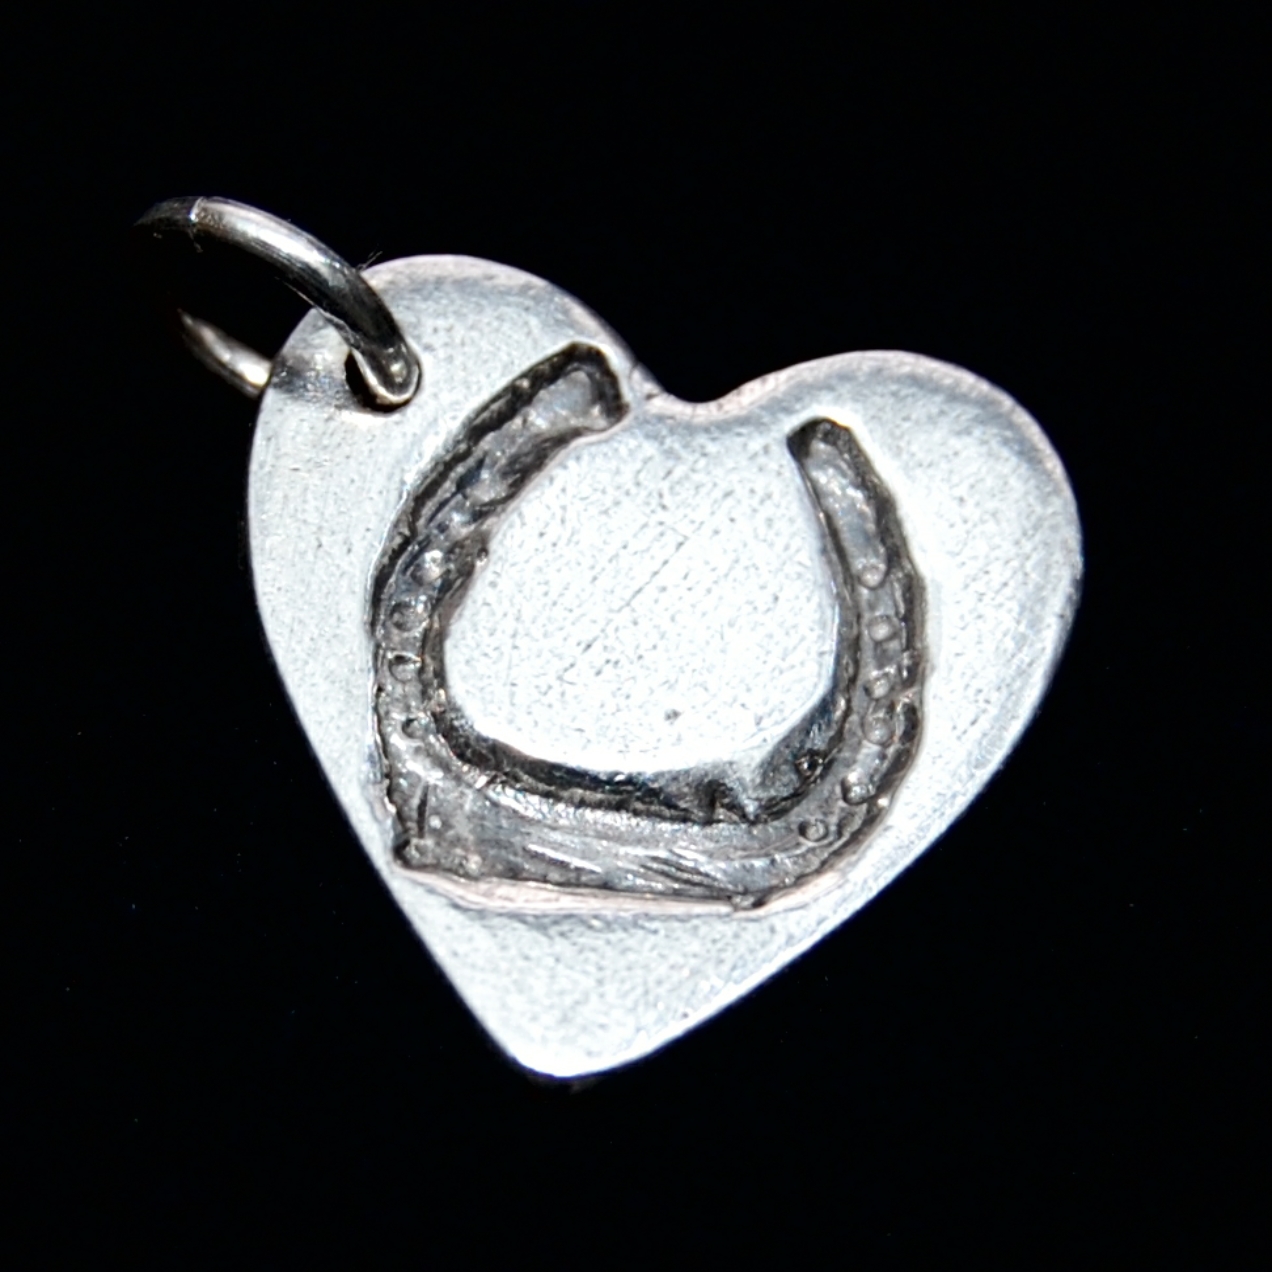 Small silver heart charm with horse shoe imprint on the front and name hand inscribed on the back.